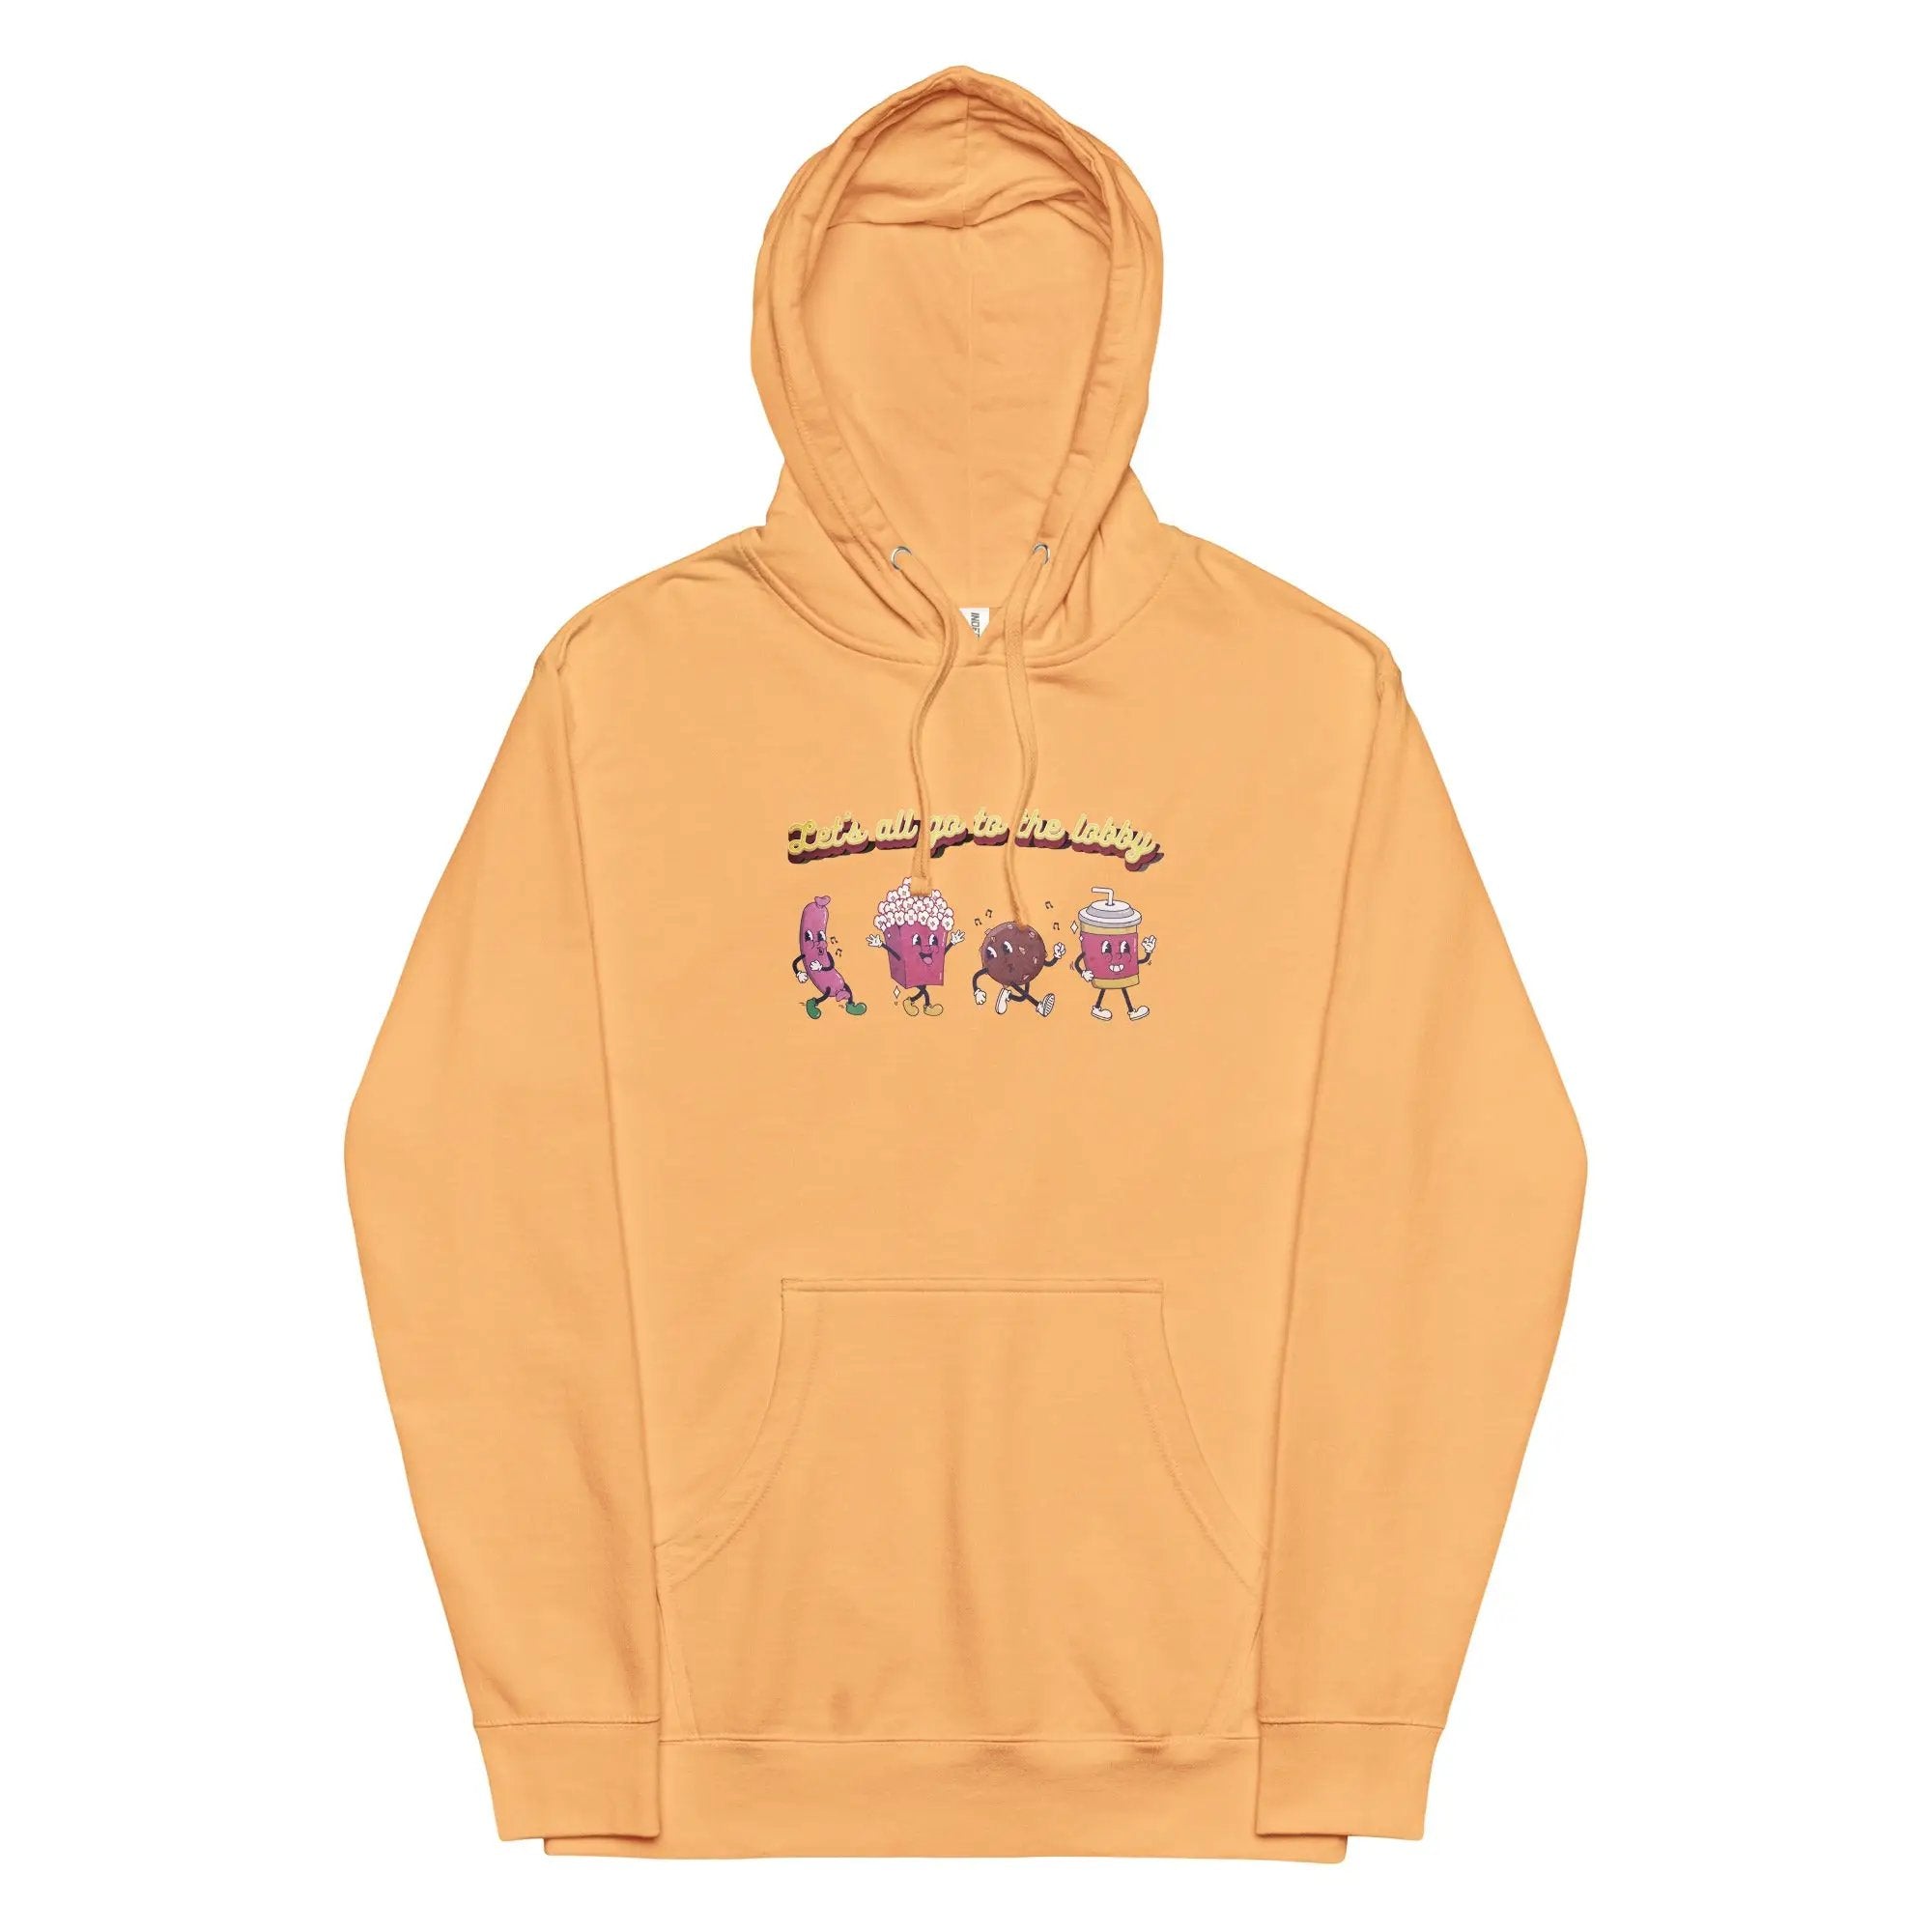 an orange hoodie with a cartoon character on it